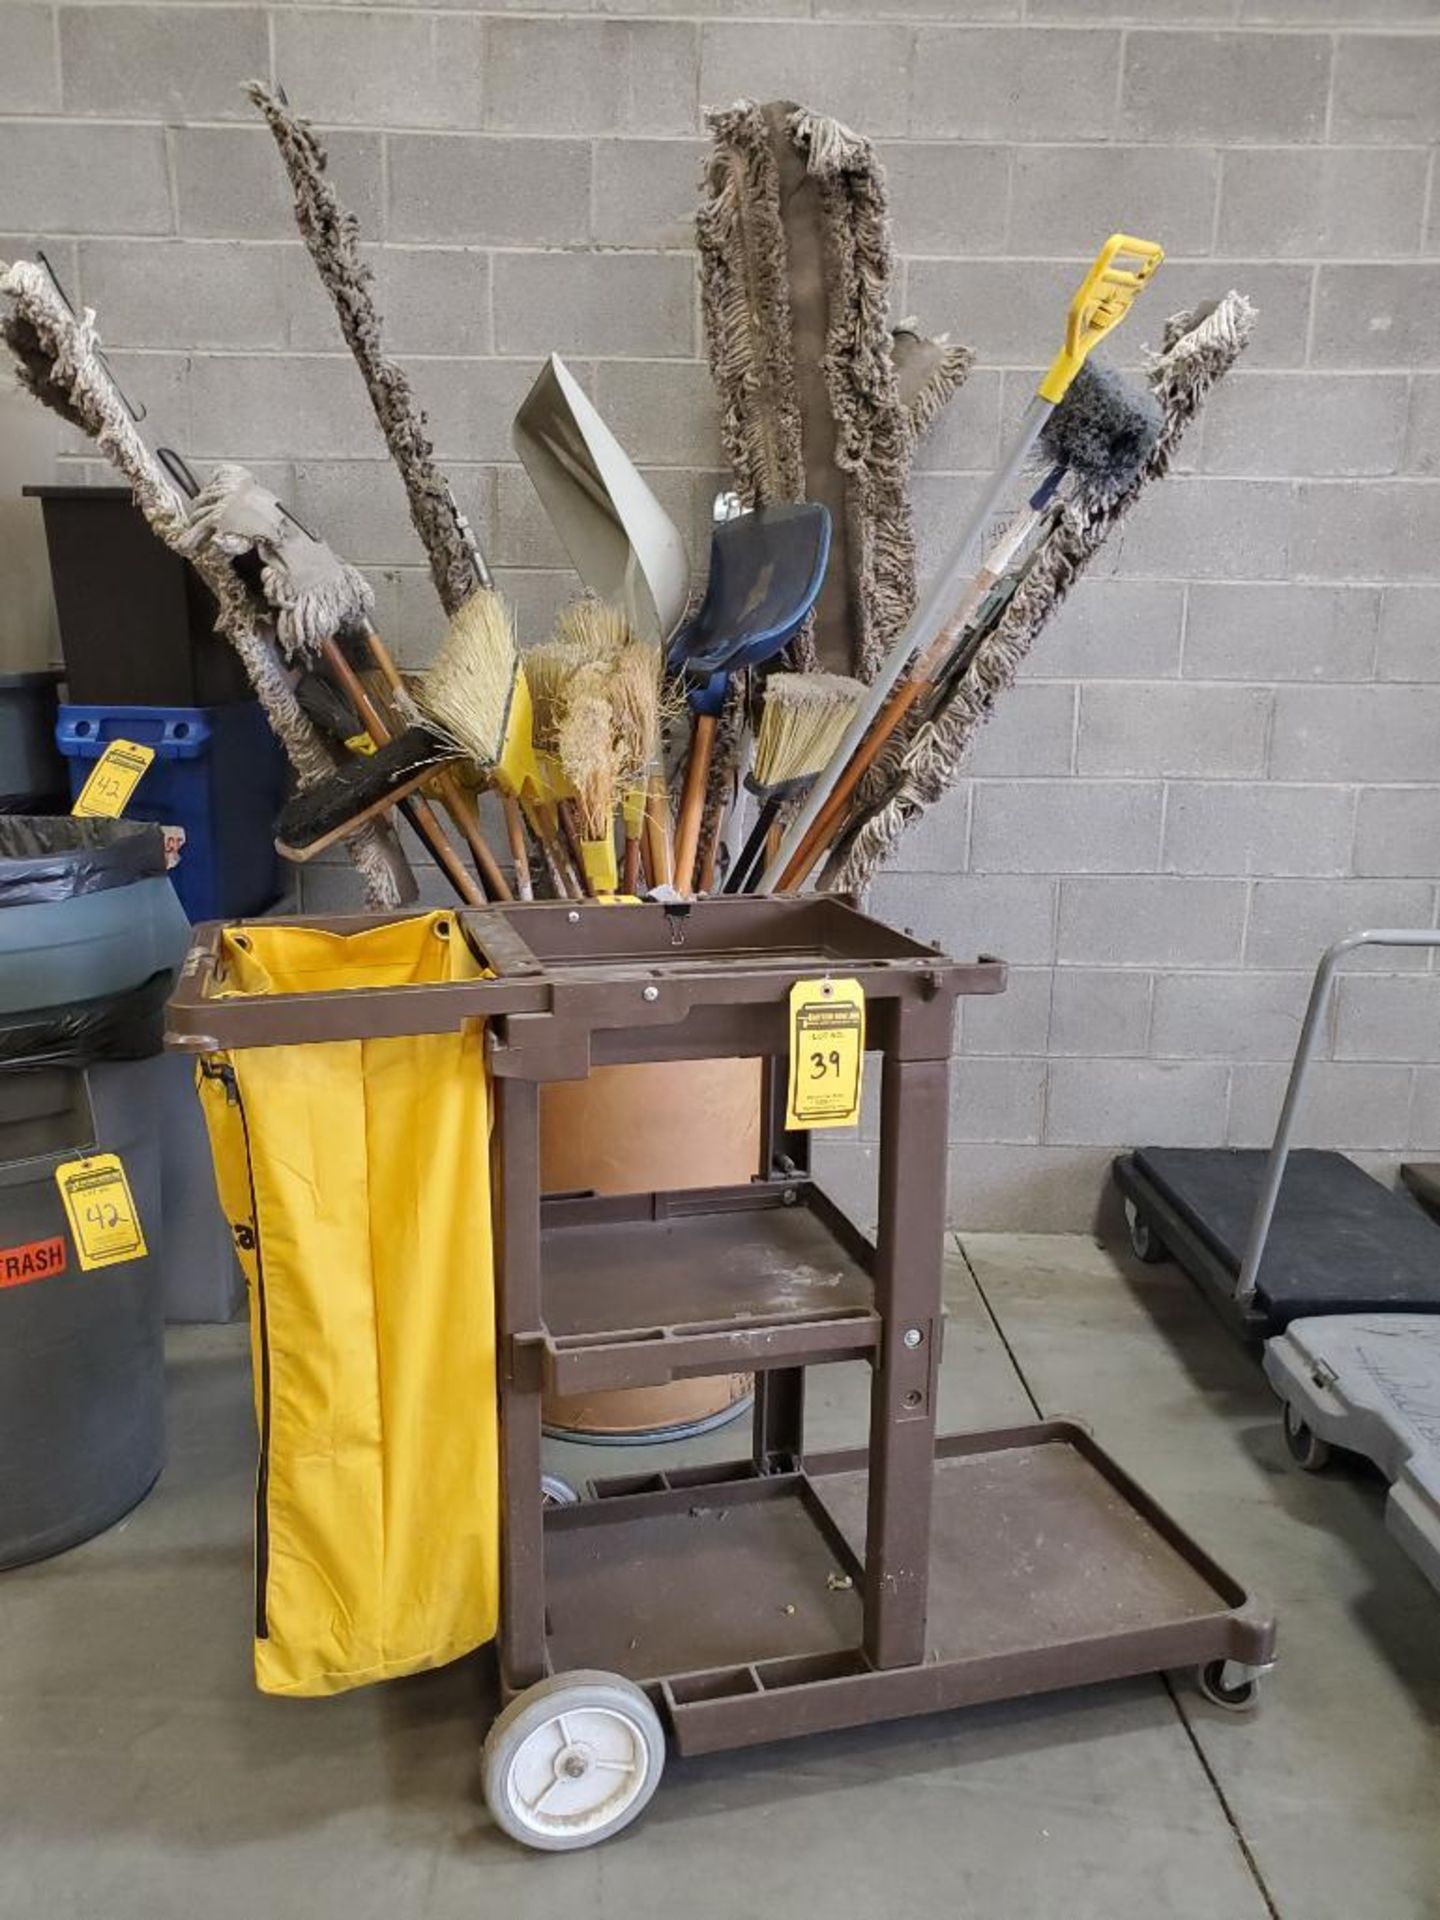 CONTINENTAL ROLLING JANITORIAL CART & CAN FULL OF BROOMS, DUSTMOPS, AND SHOVELS ***LOCATED AT